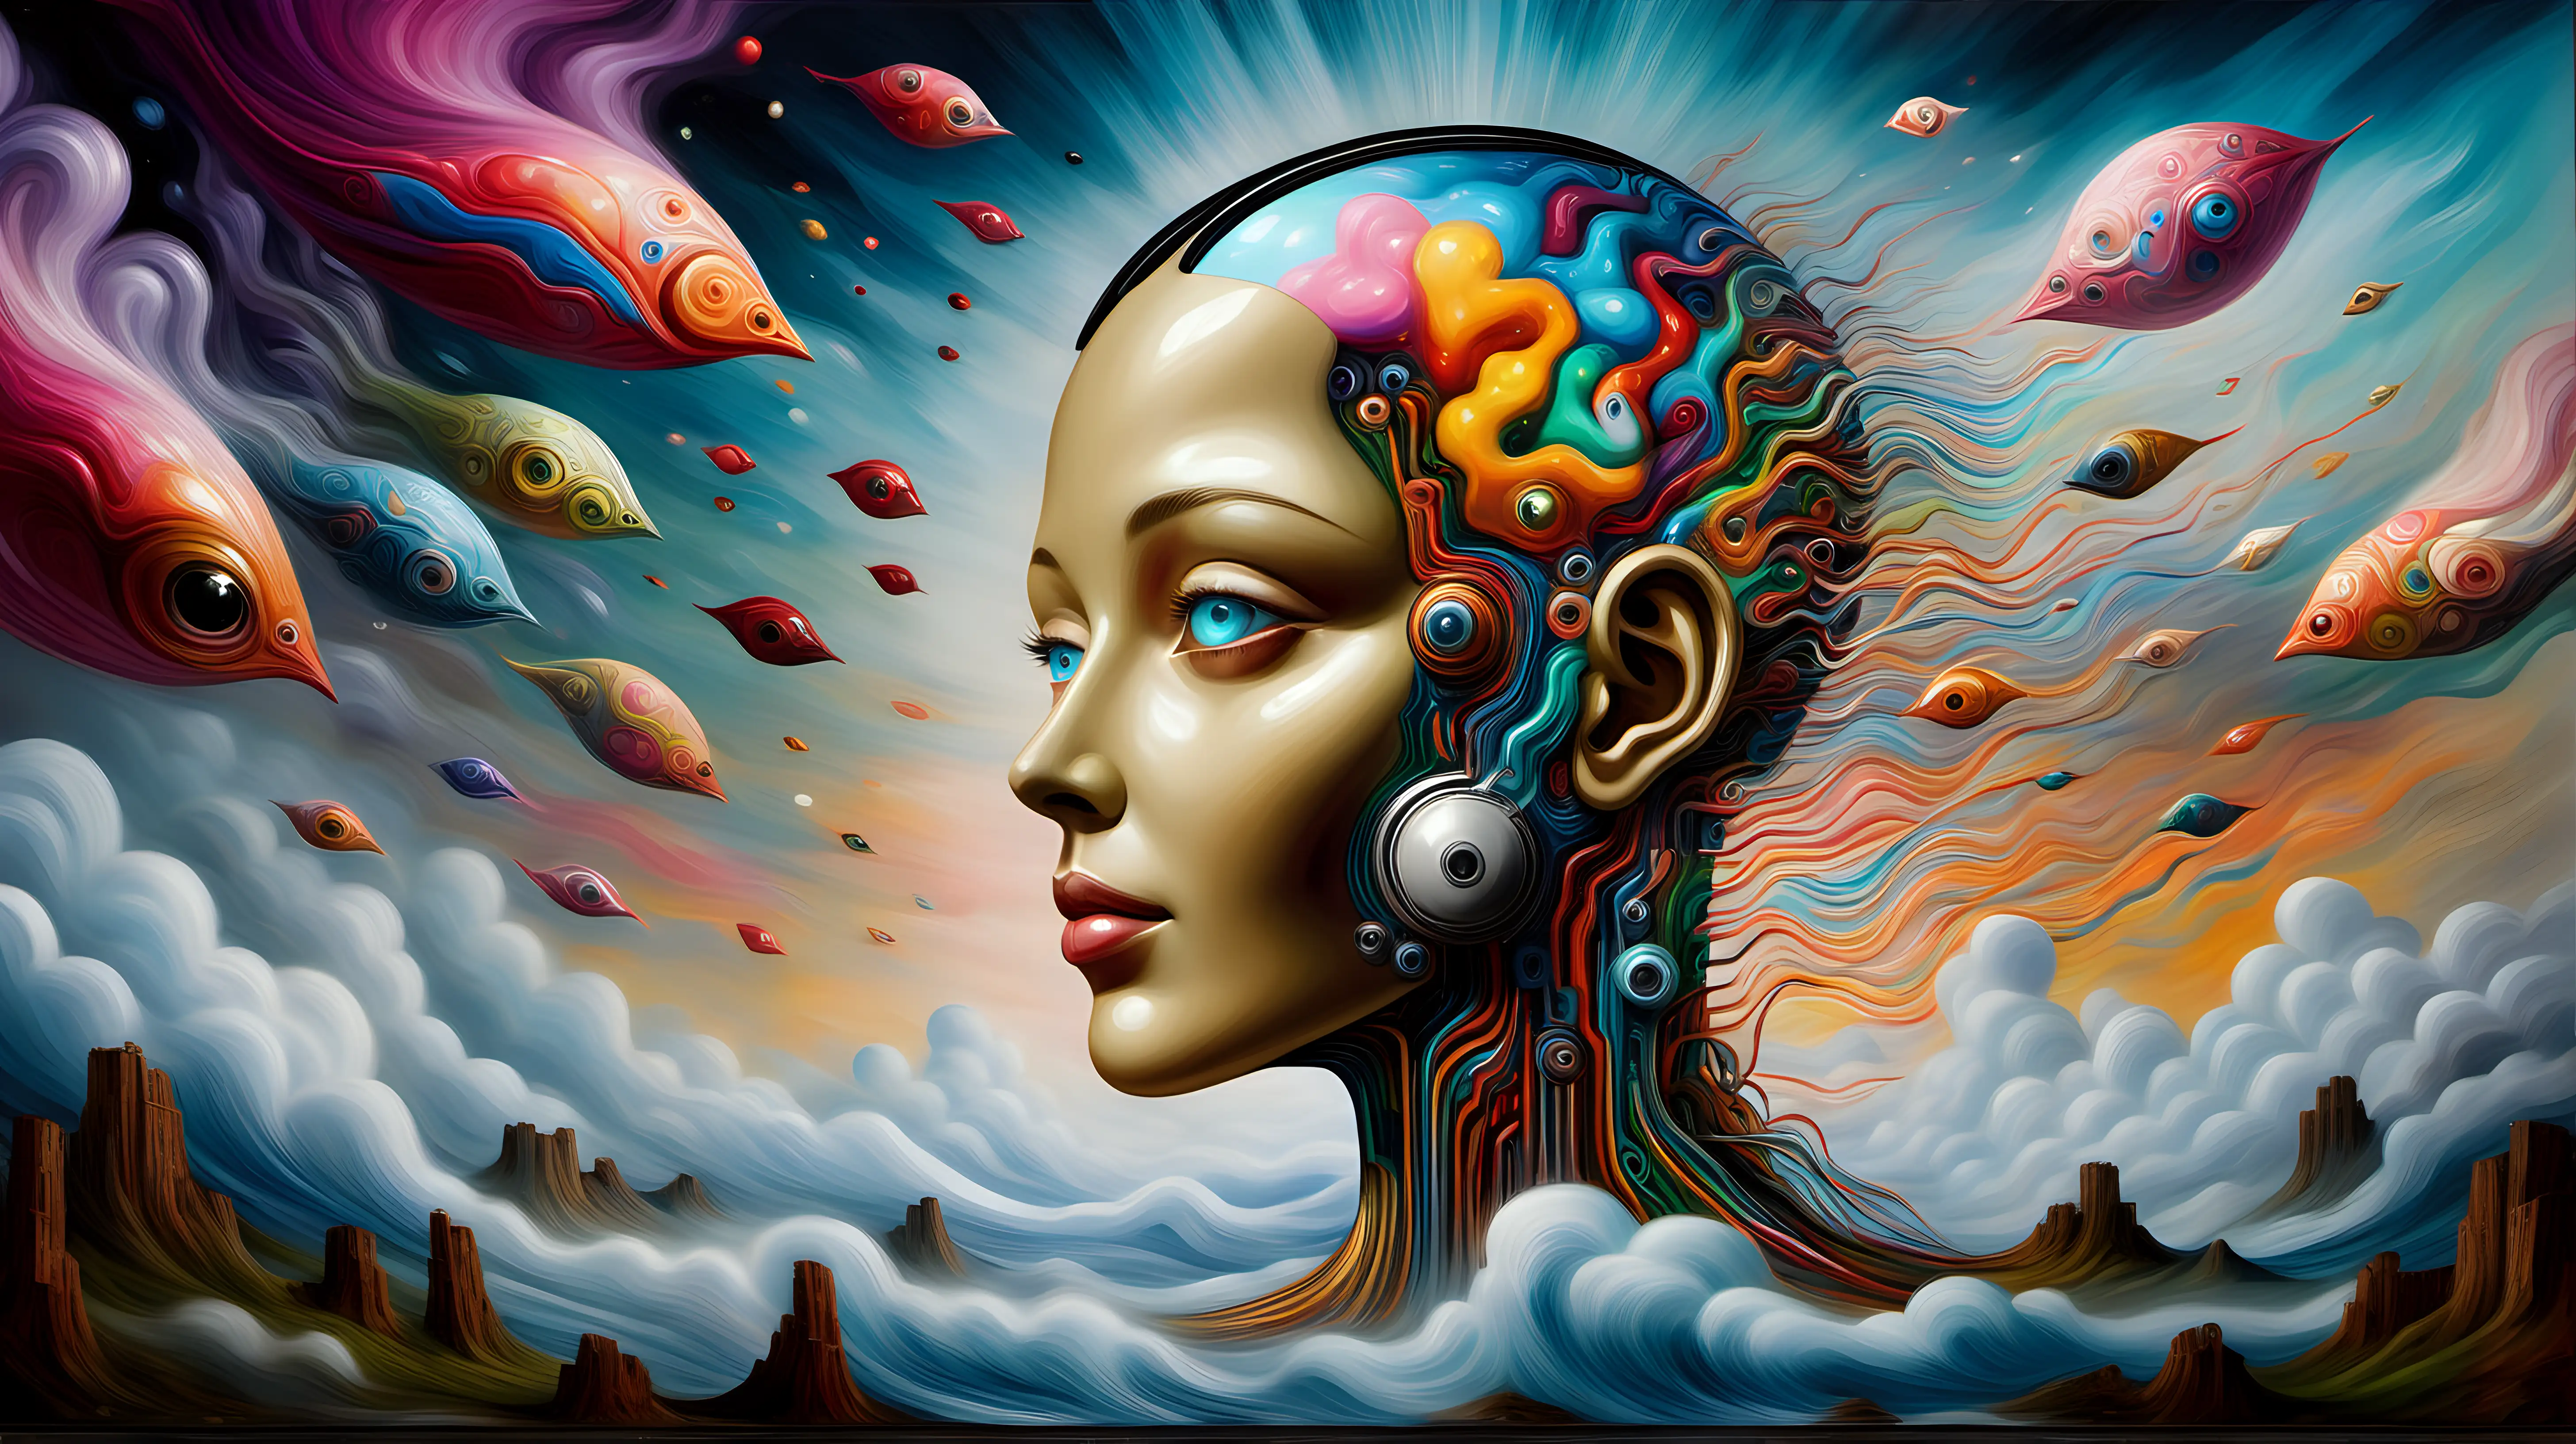 a masterpiece oil painting expressing what an AI art program would dream about, vivid, dreamy, surreal